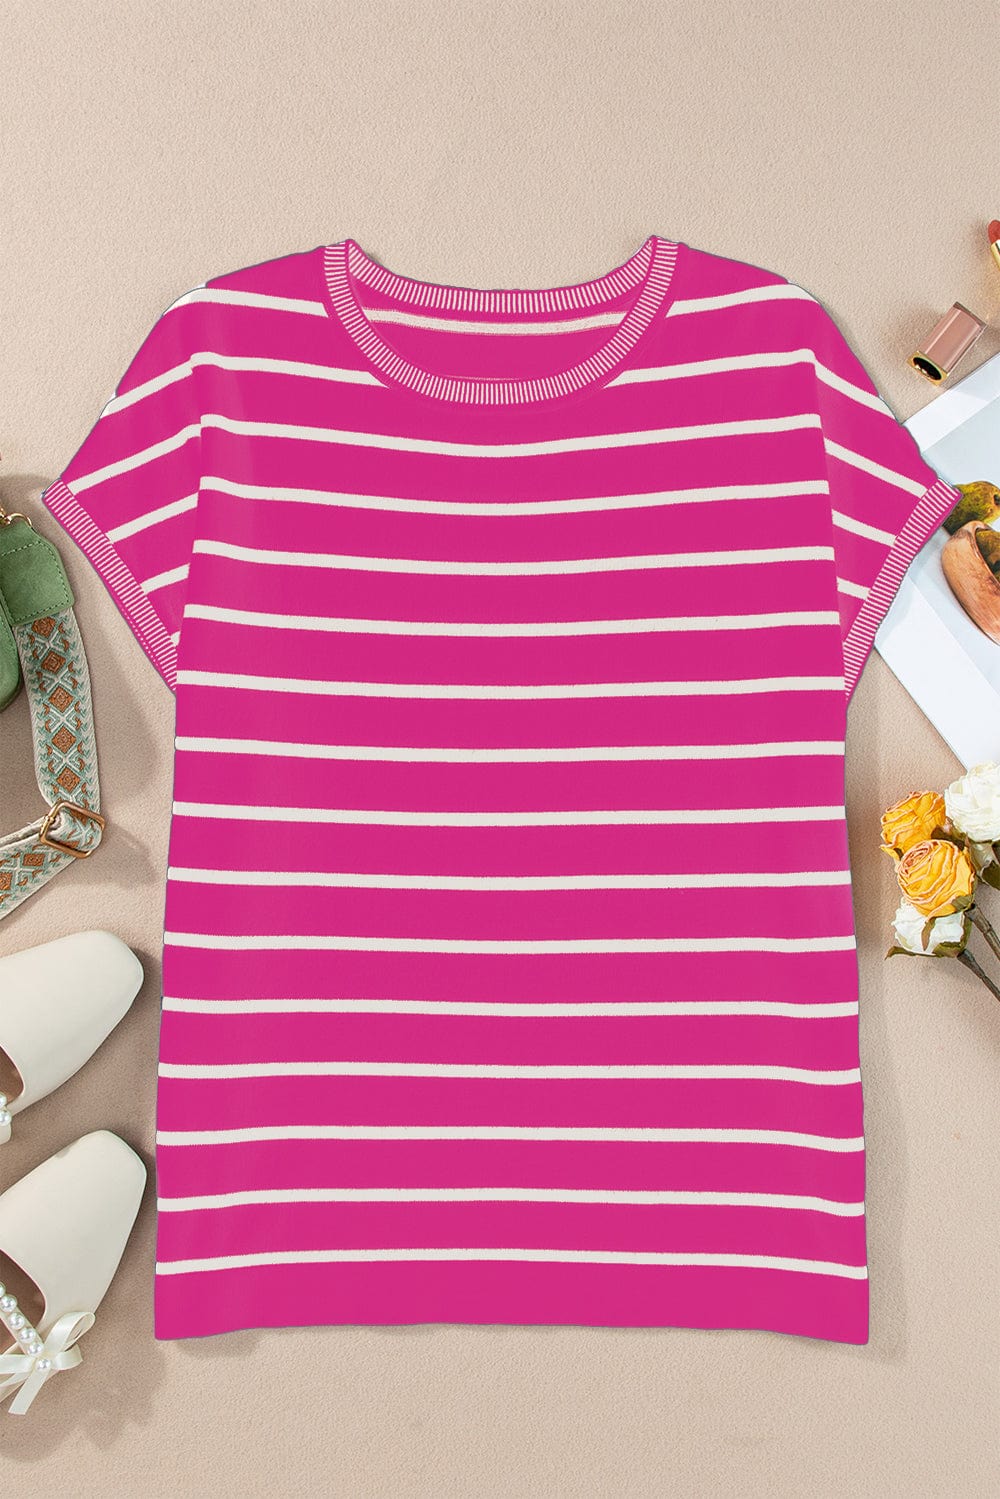 The802Gypsy shirts and tops Hot Pink / S GYPSY-Striped Round Neck Cap Sleeve Knit Top